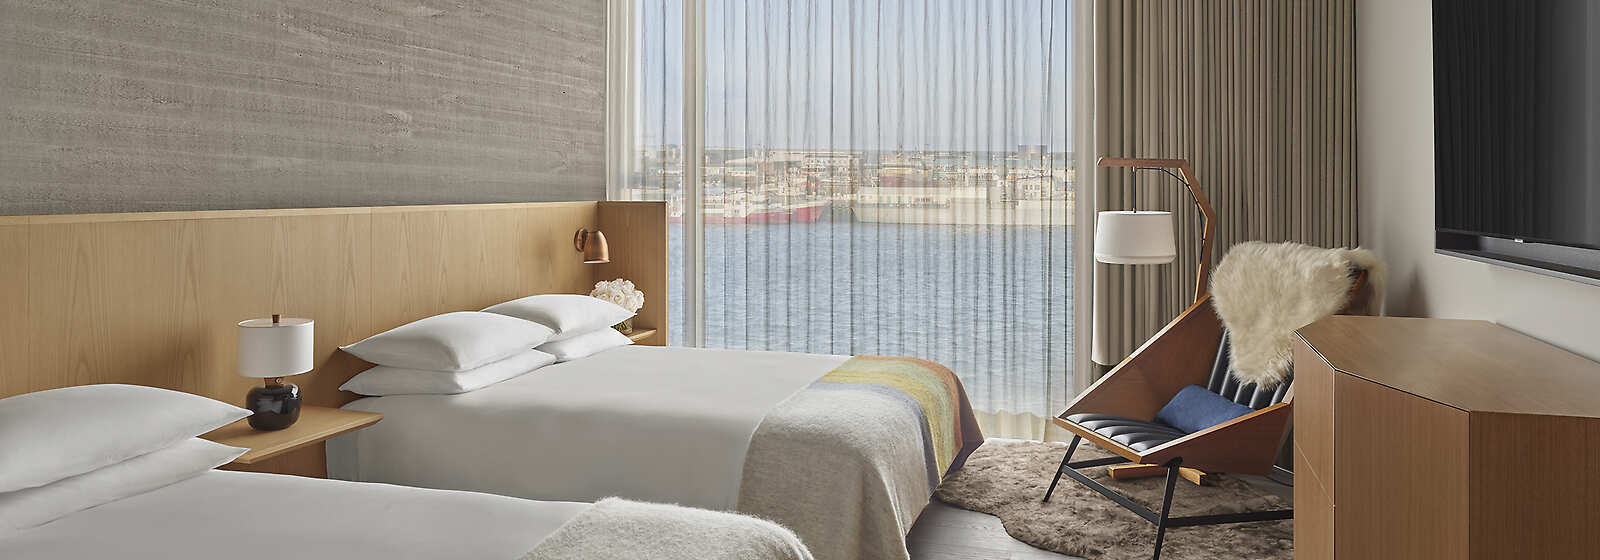 Our sophisticated Deluxe rooms are overlooking the Reykjavik Harbor and are available with King beds and Double beds.